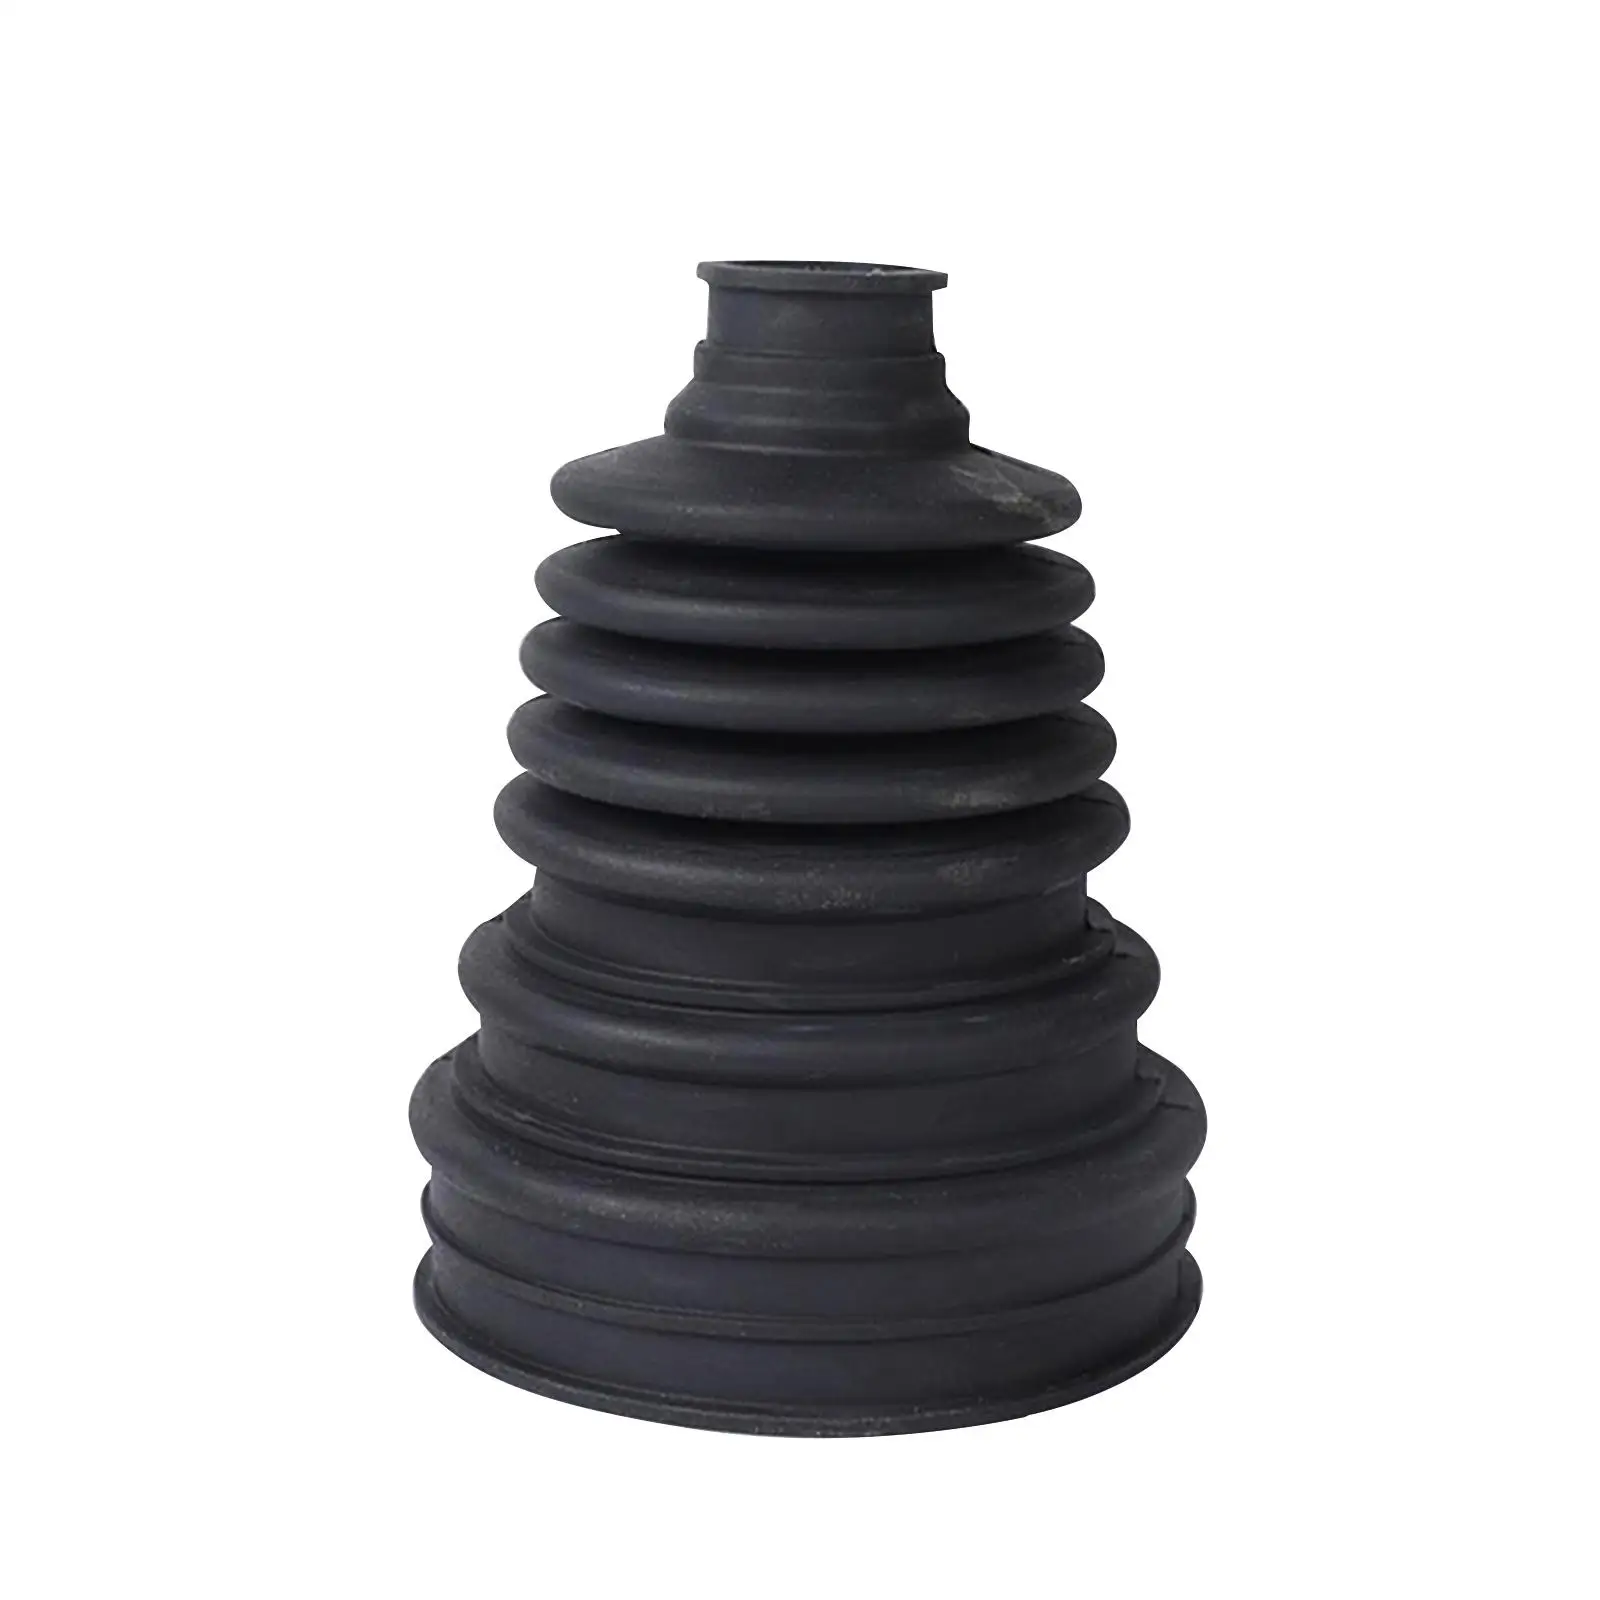 Car CV Joint Boot Dust Rubber Durable Adjustable Easy to Install for Car